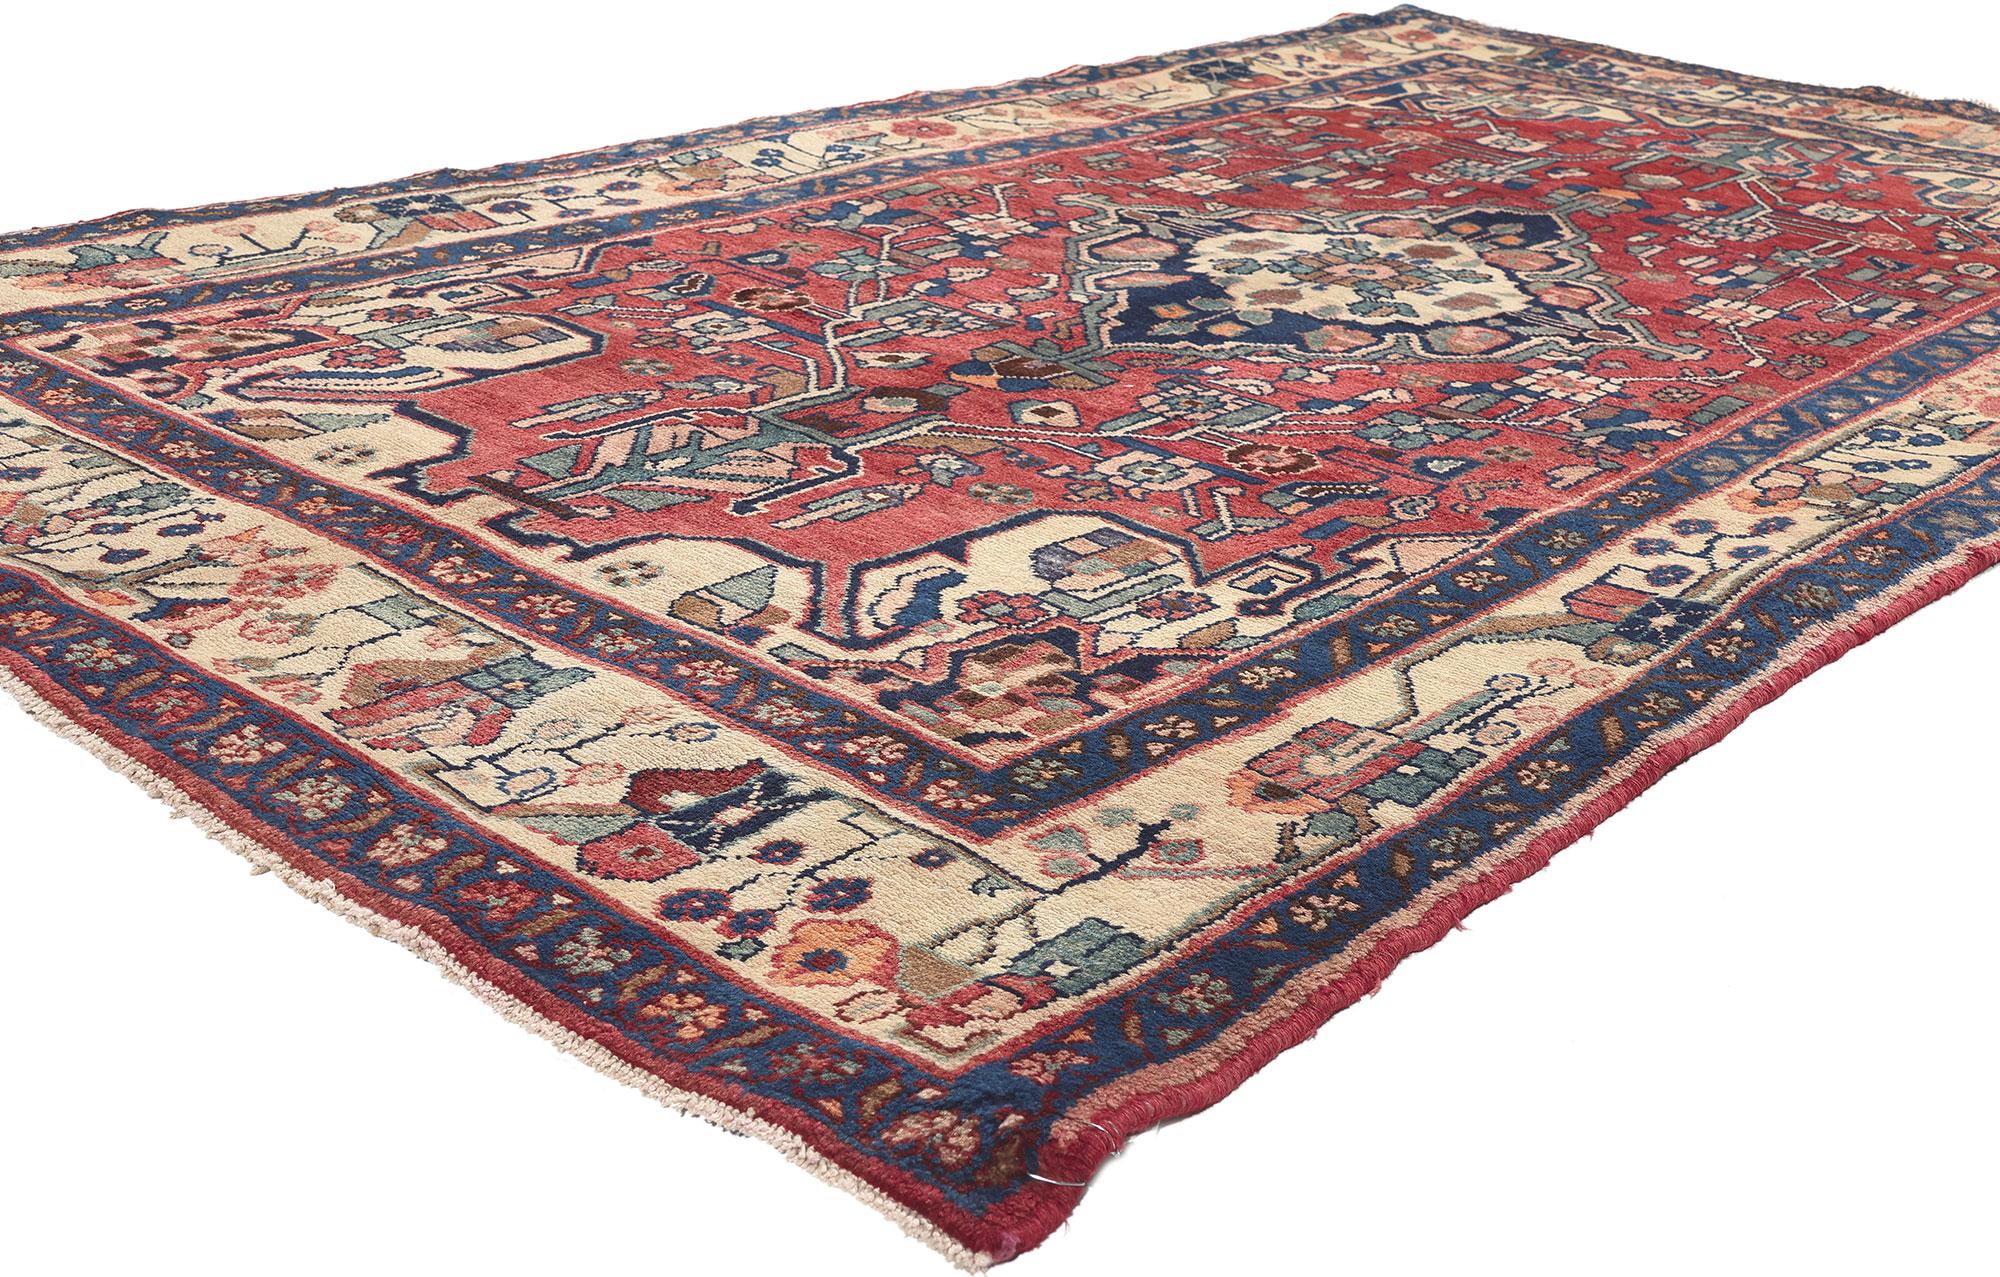 61258 Vintage Persian Hamadan Rug, 04'07 x 08'07.
Patriotic flair meets preppy formality in this hand knotted wool vintage Persian Hamadan rug. The angular botanical design and sophisticated color palette woven into this piece work together